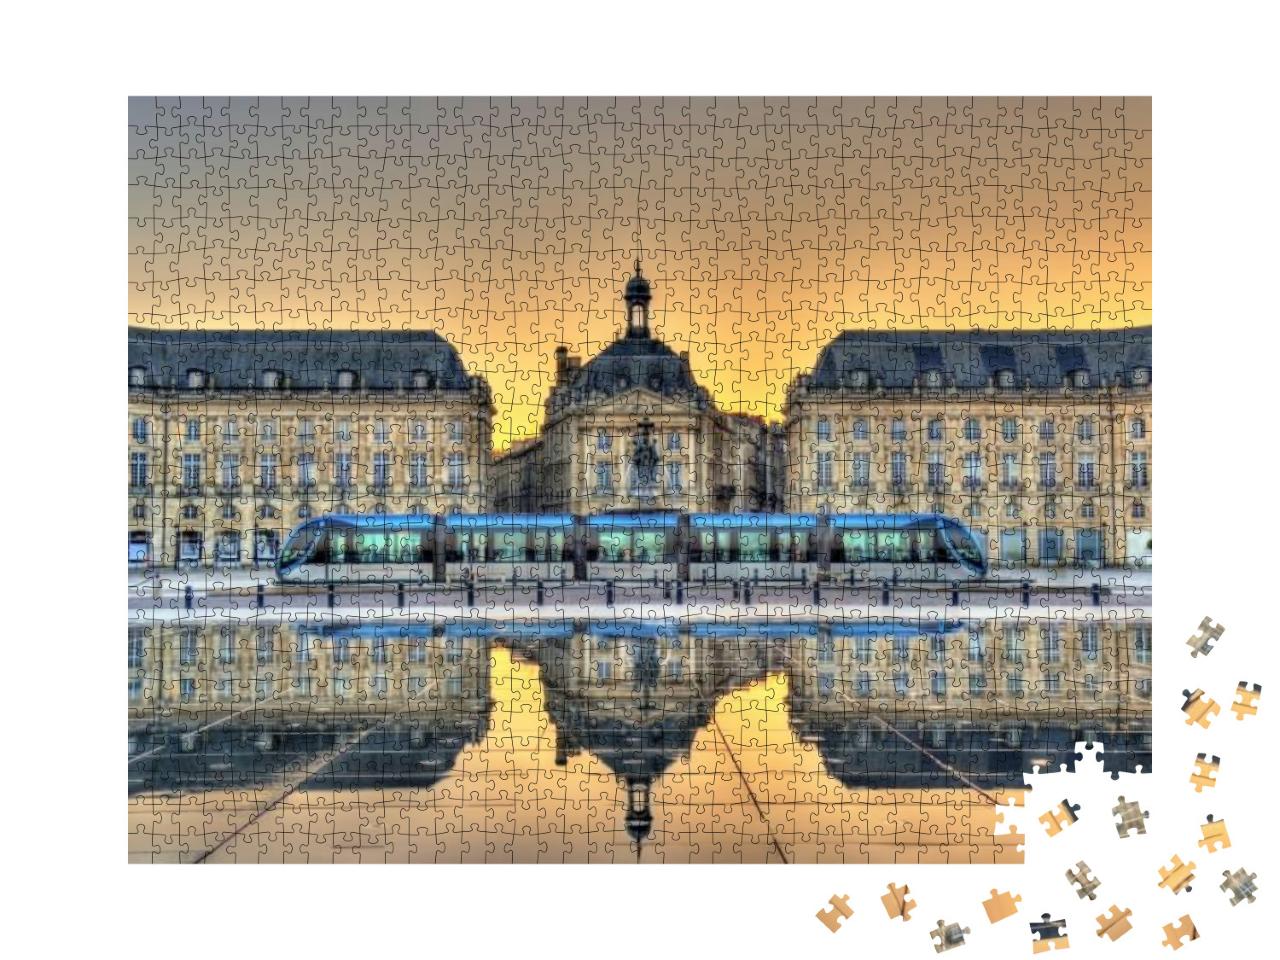 Place De La Bourse Reflecting from the Water Mirror in Bo... Jigsaw Puzzle with 1000 pieces